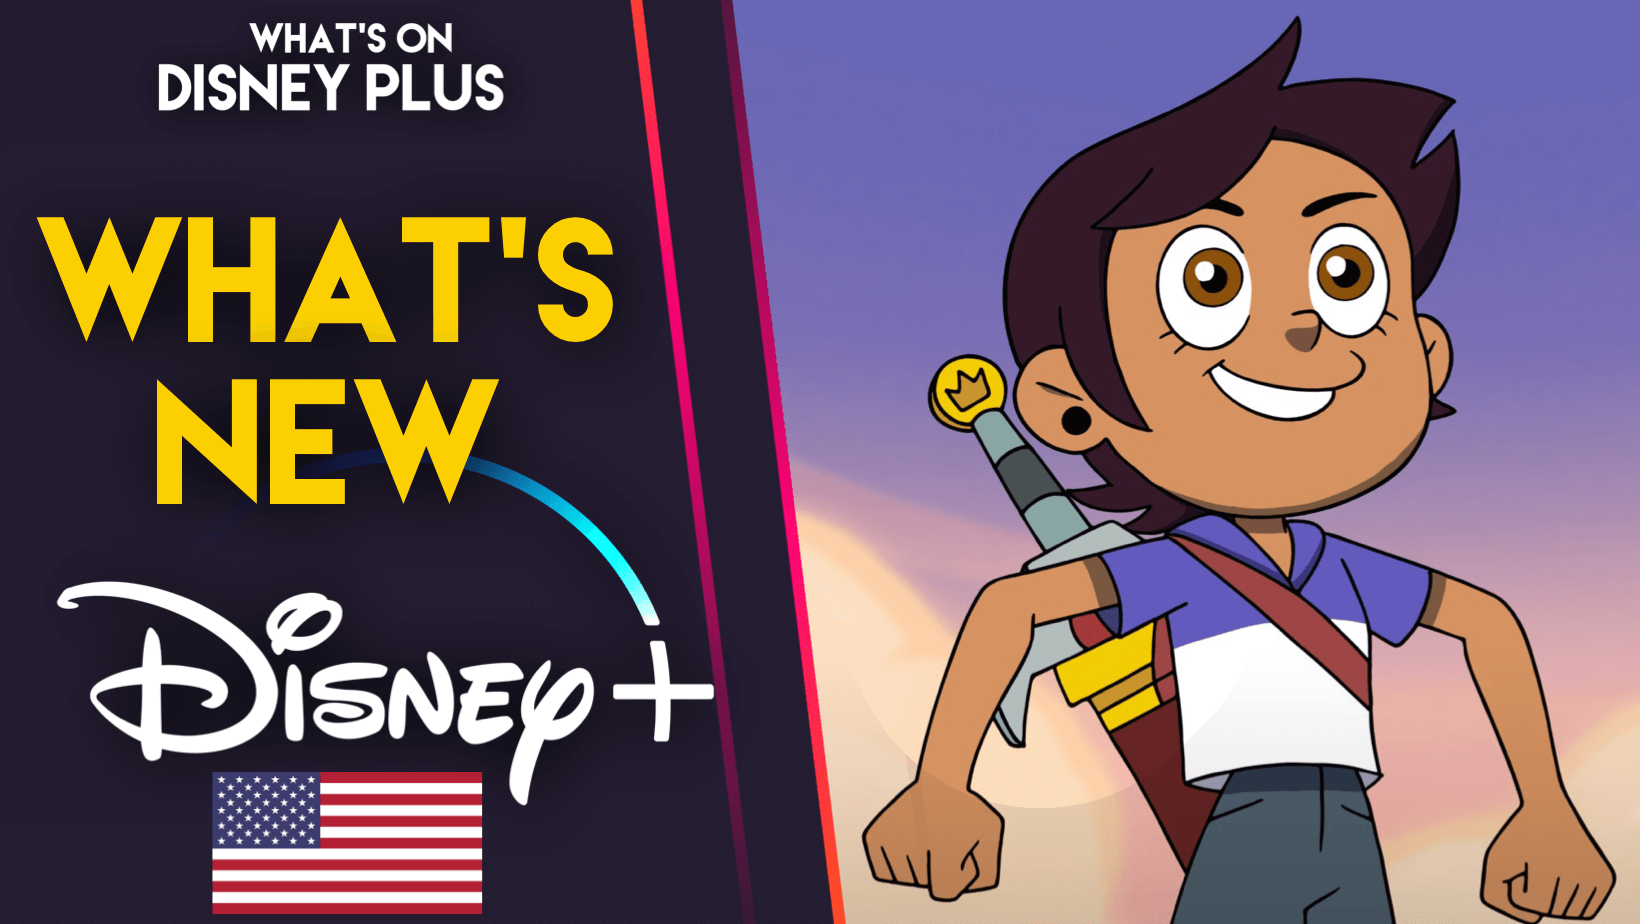 The Owl House” – Season 3 Coming Soon To Disney+ (US) – What's On